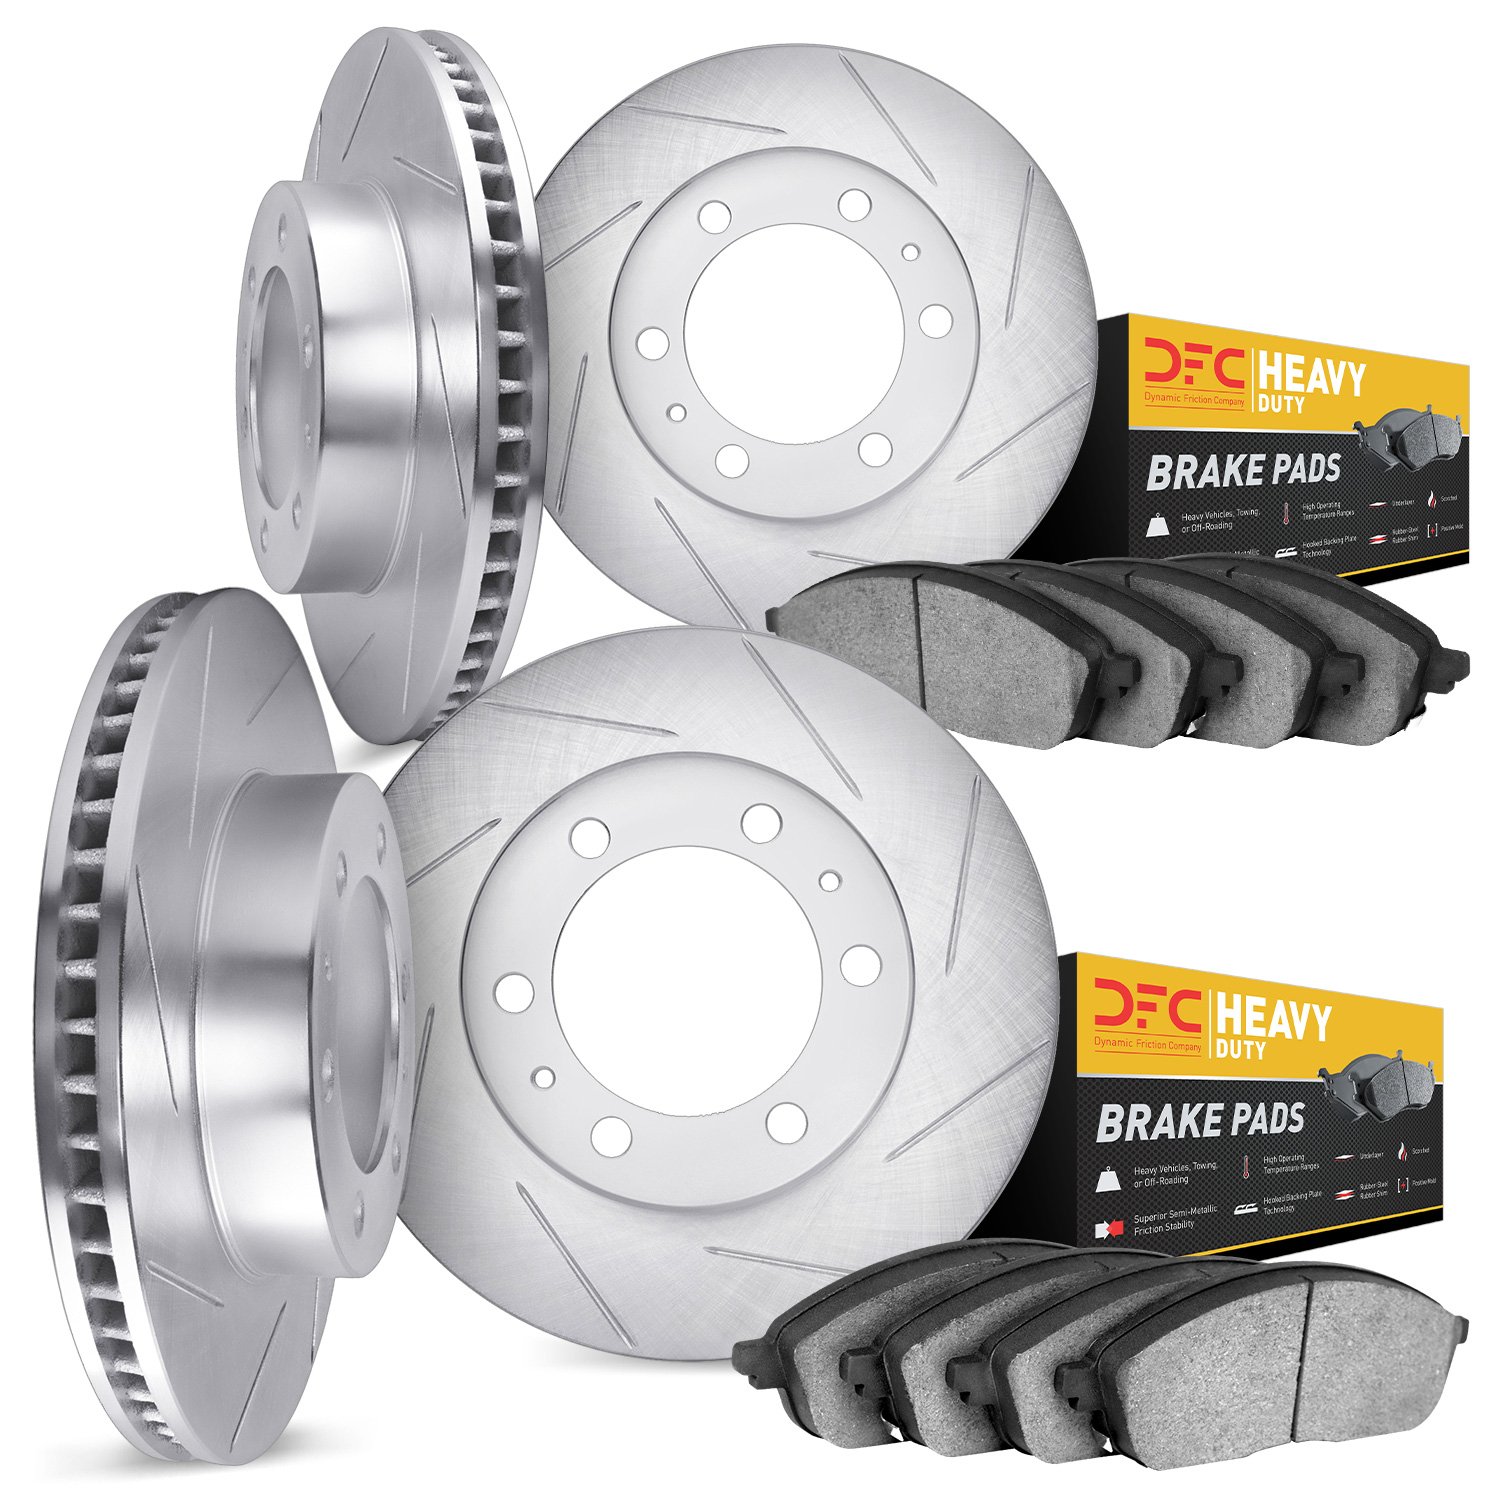 5204-40219 Slotted Brake Rotors w/Heavy-Duty Brake Pads Kits [Silver], Fits Select Multiple Makes/Models, Position: Front and Re